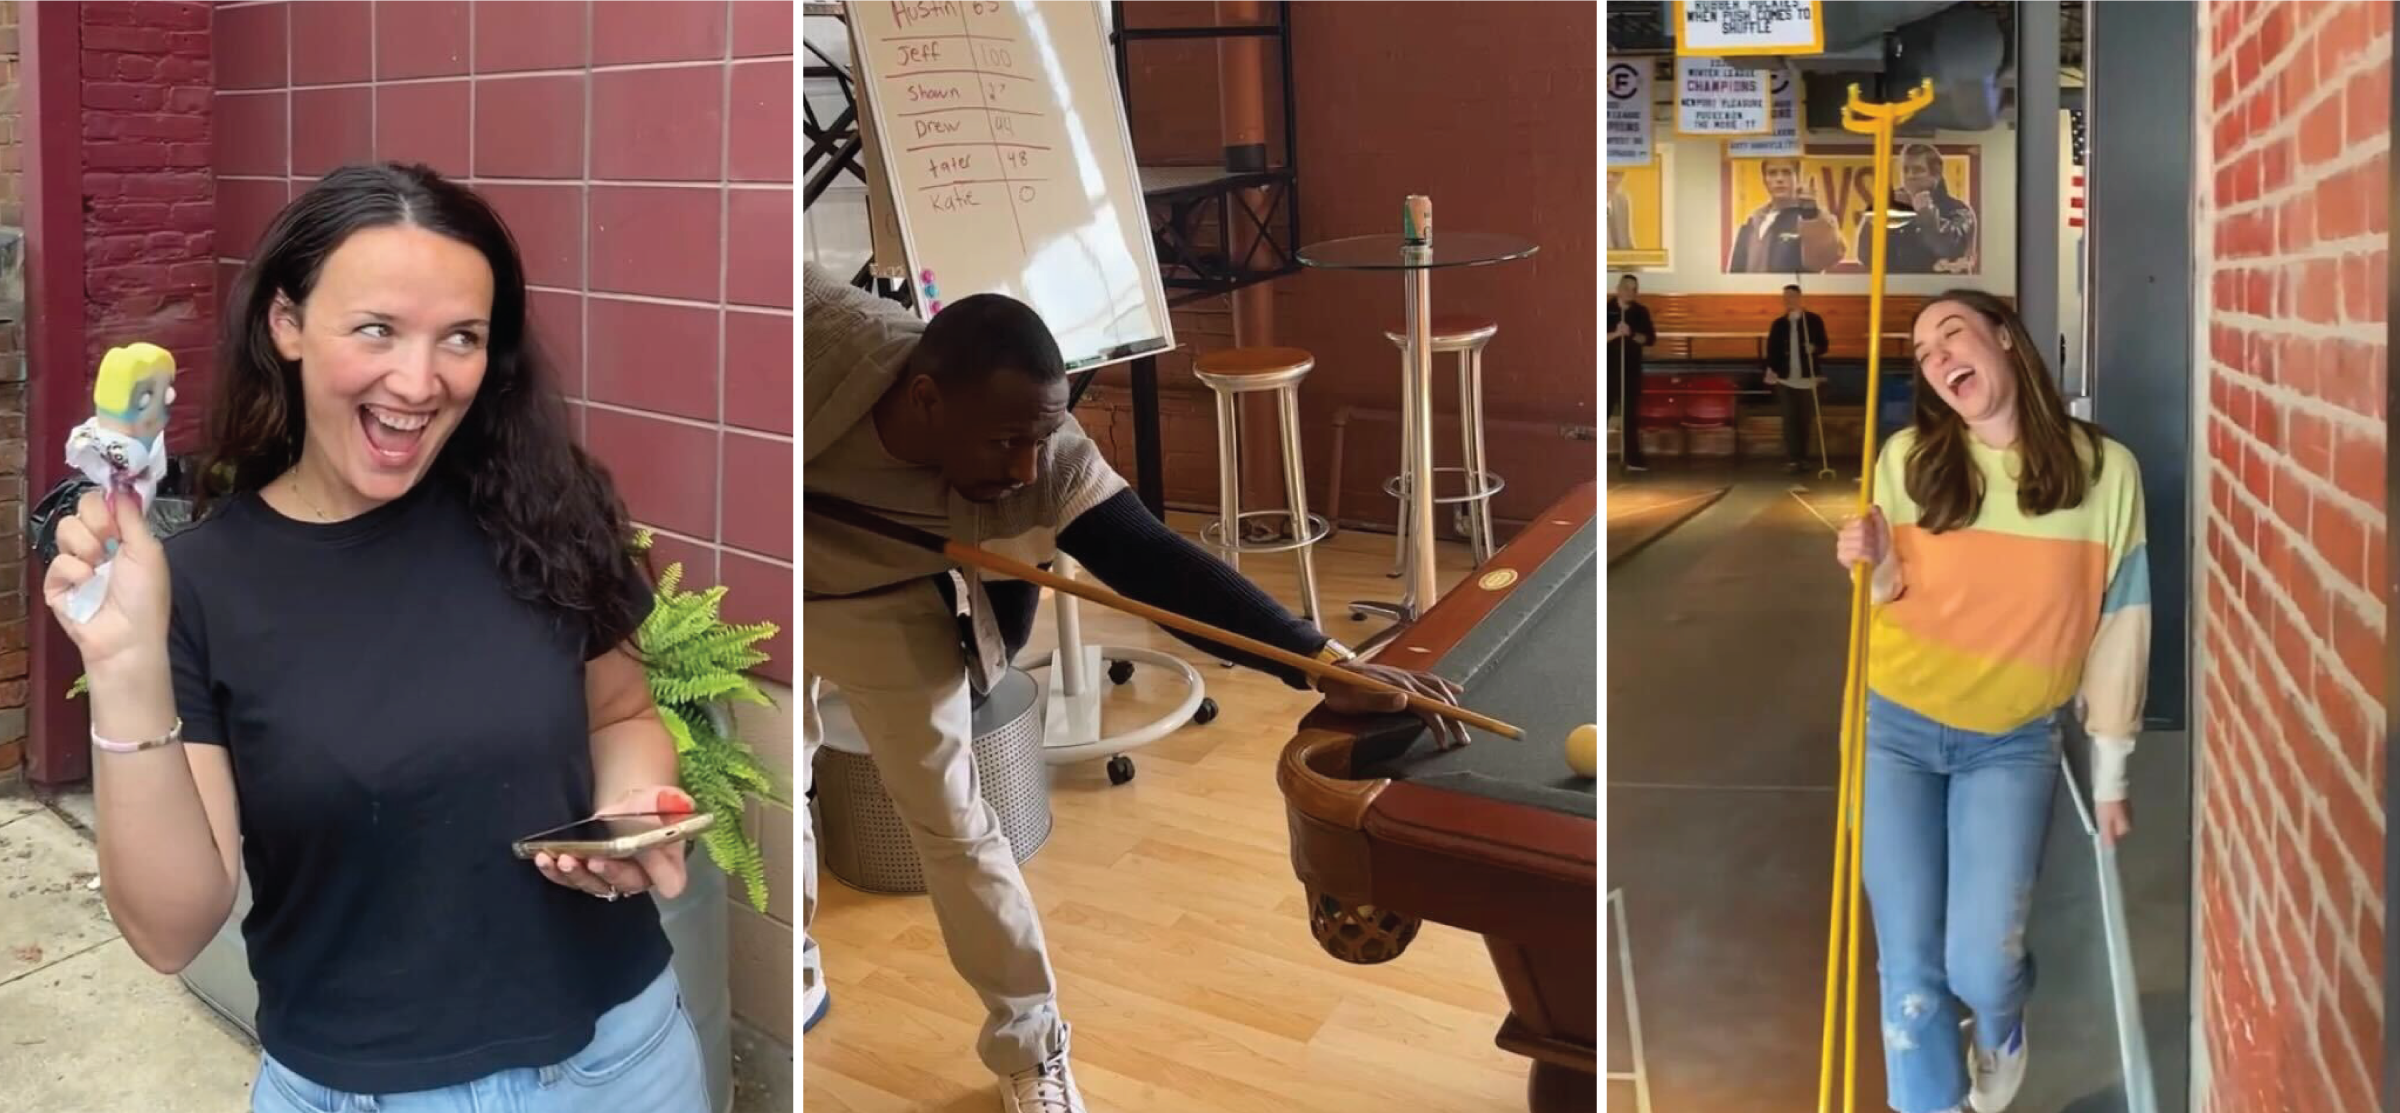 Picture of a woman holding a popsicle, picture of a man holding a cue stick playing pool, picture of a woman laughing holding a shuffle board stick